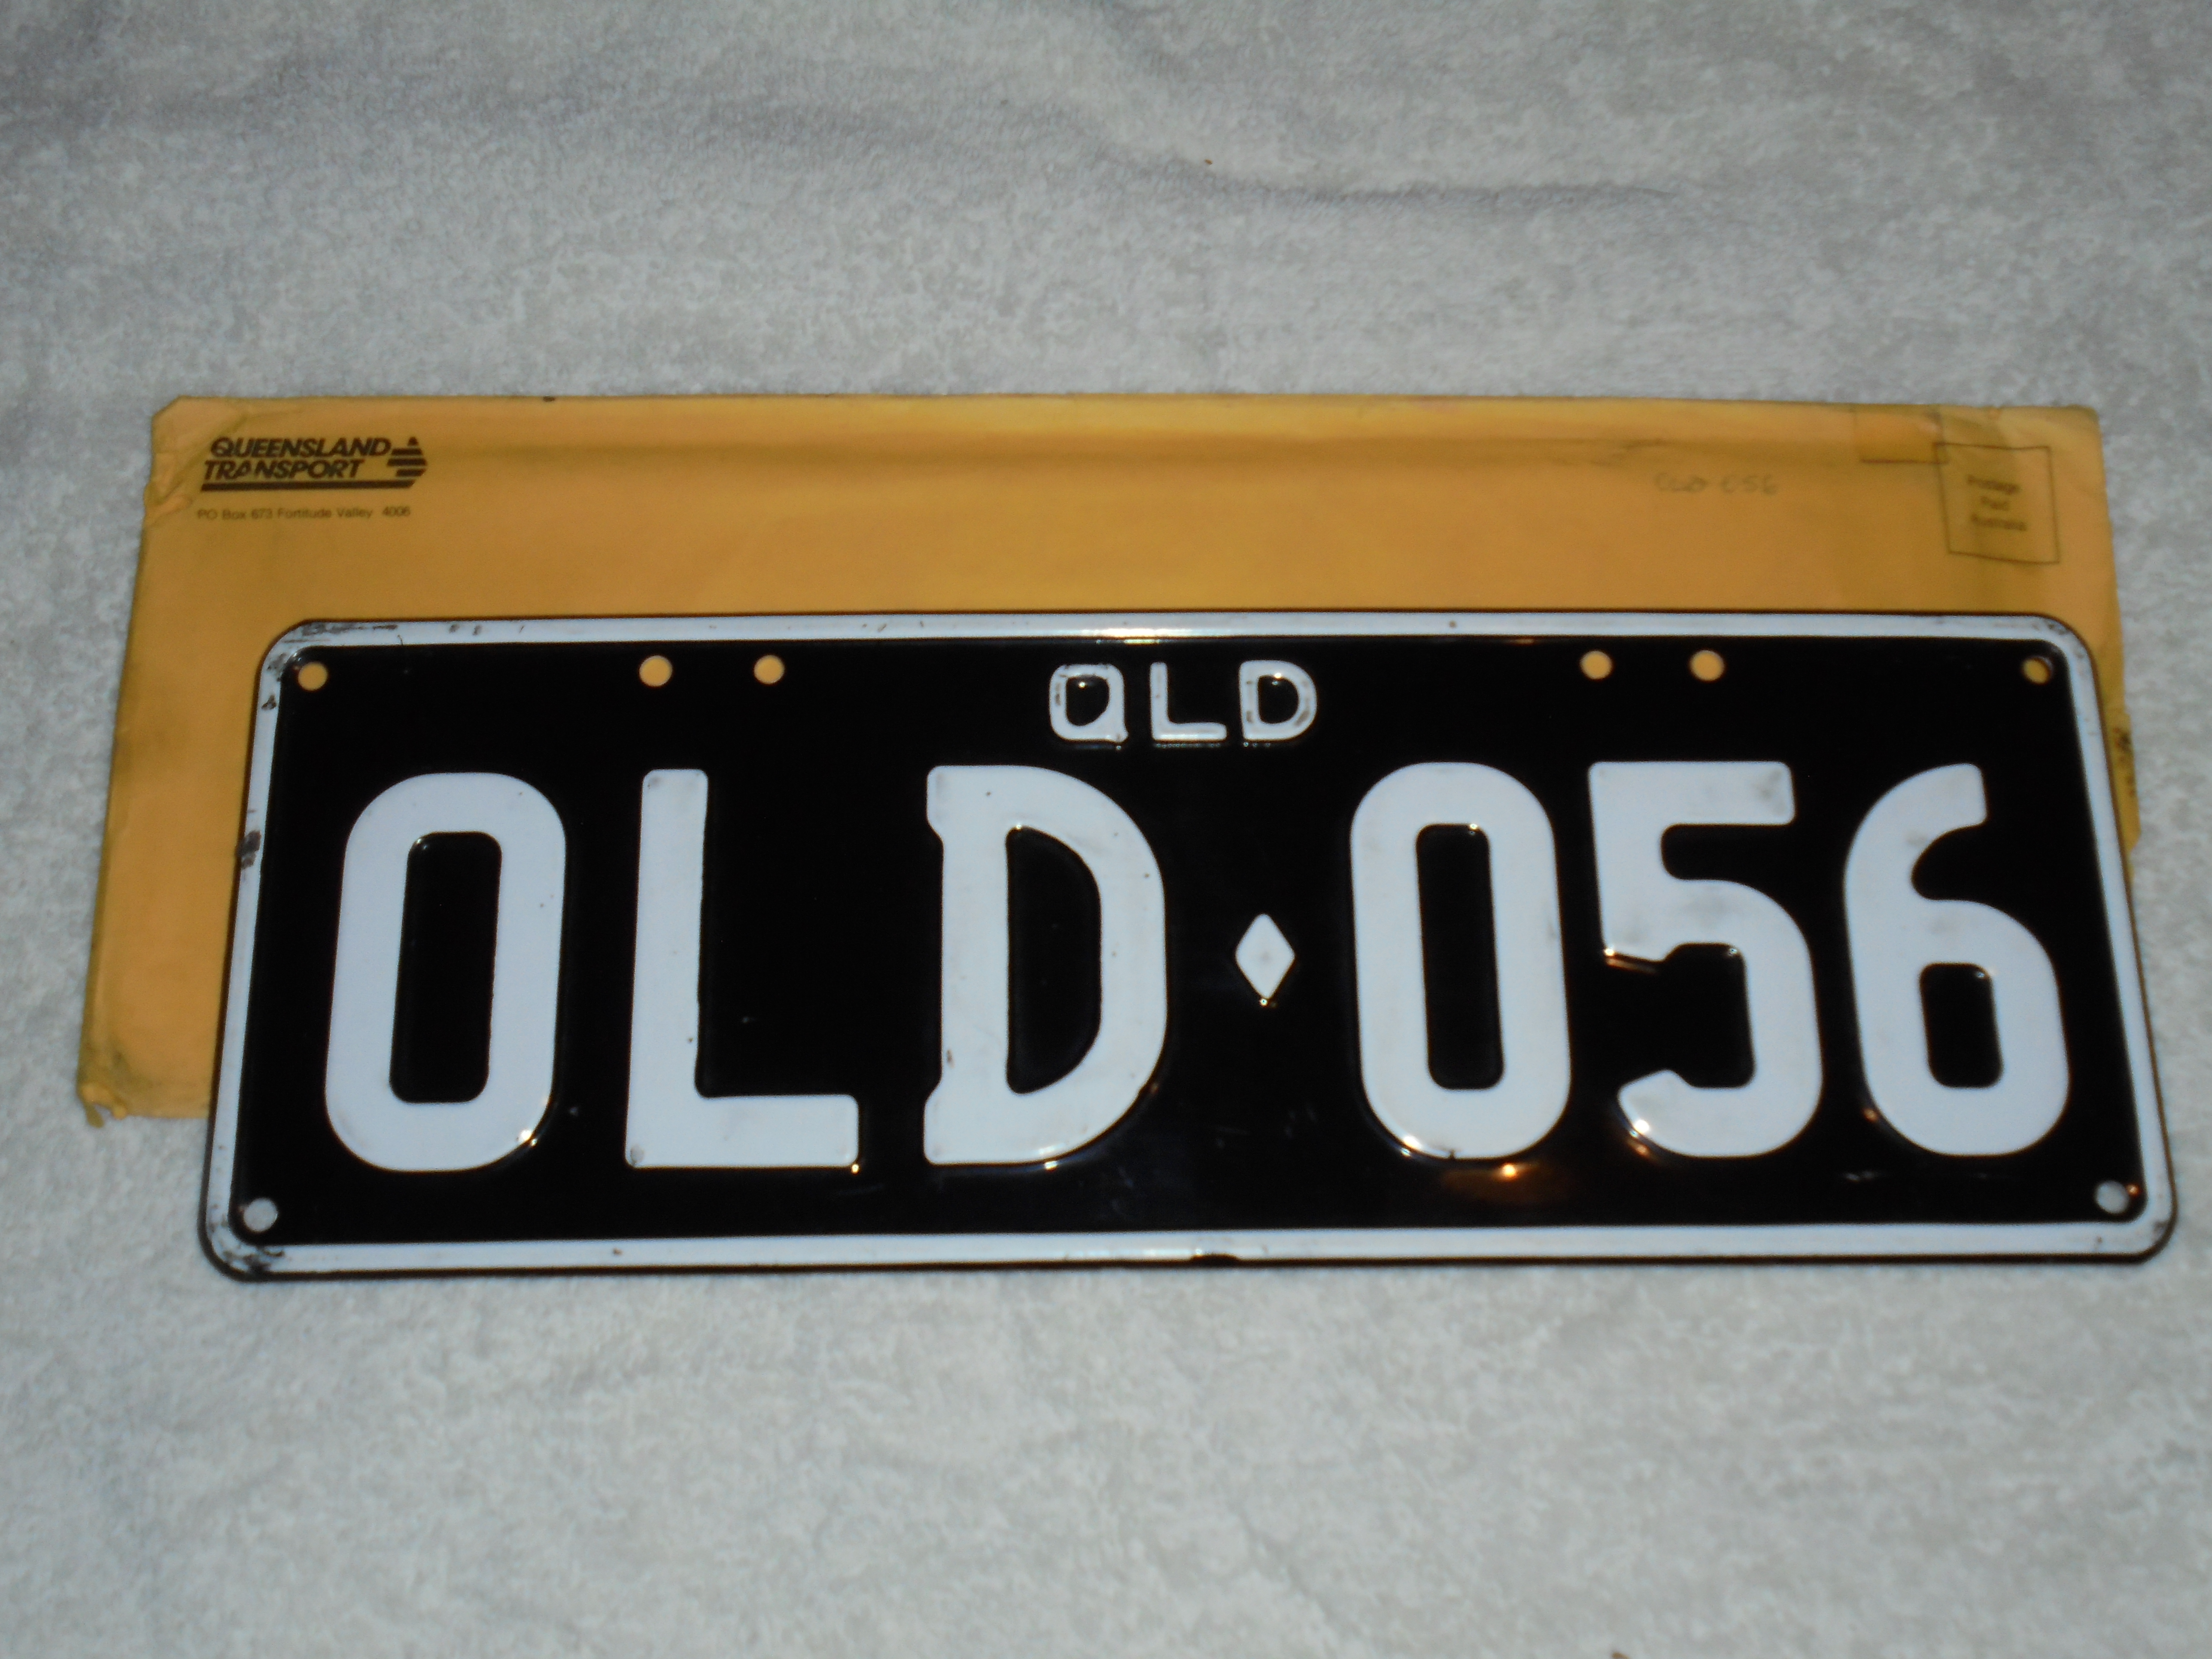 00X-002 New QLD Black & White Legal Number Plates